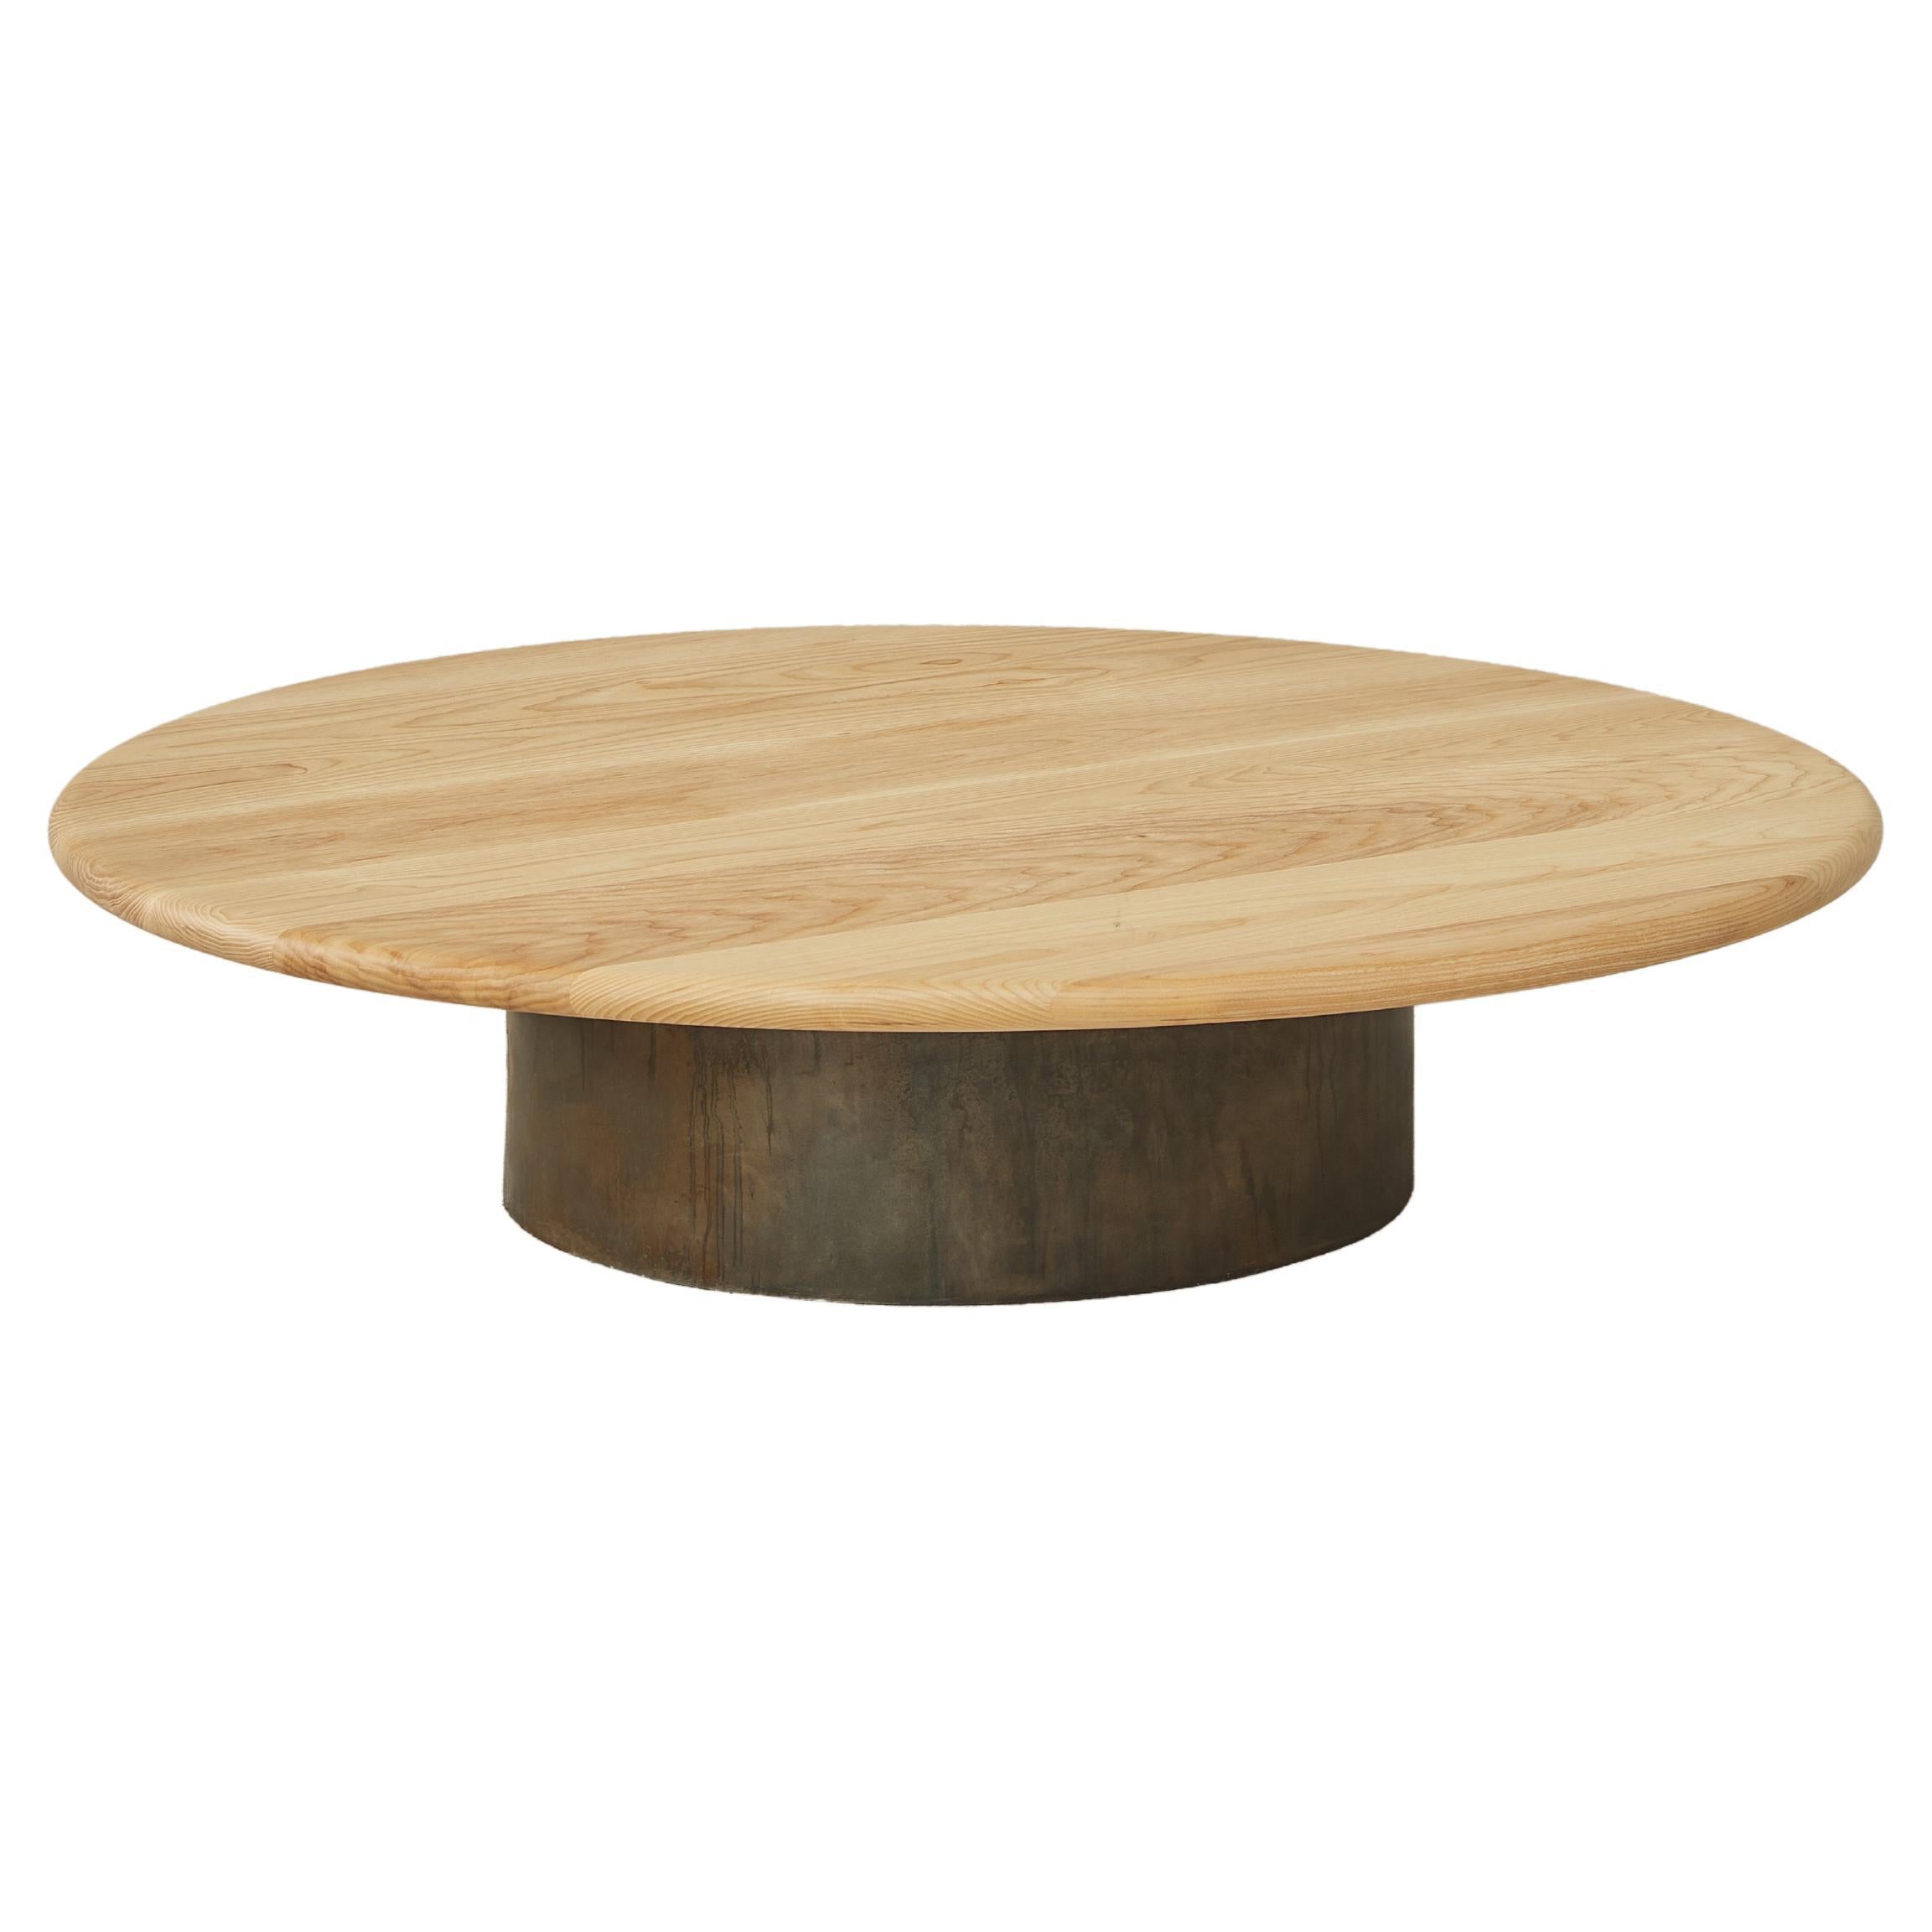 Raindrop Coffee Table, 1000, Ash / Patinated For Sale